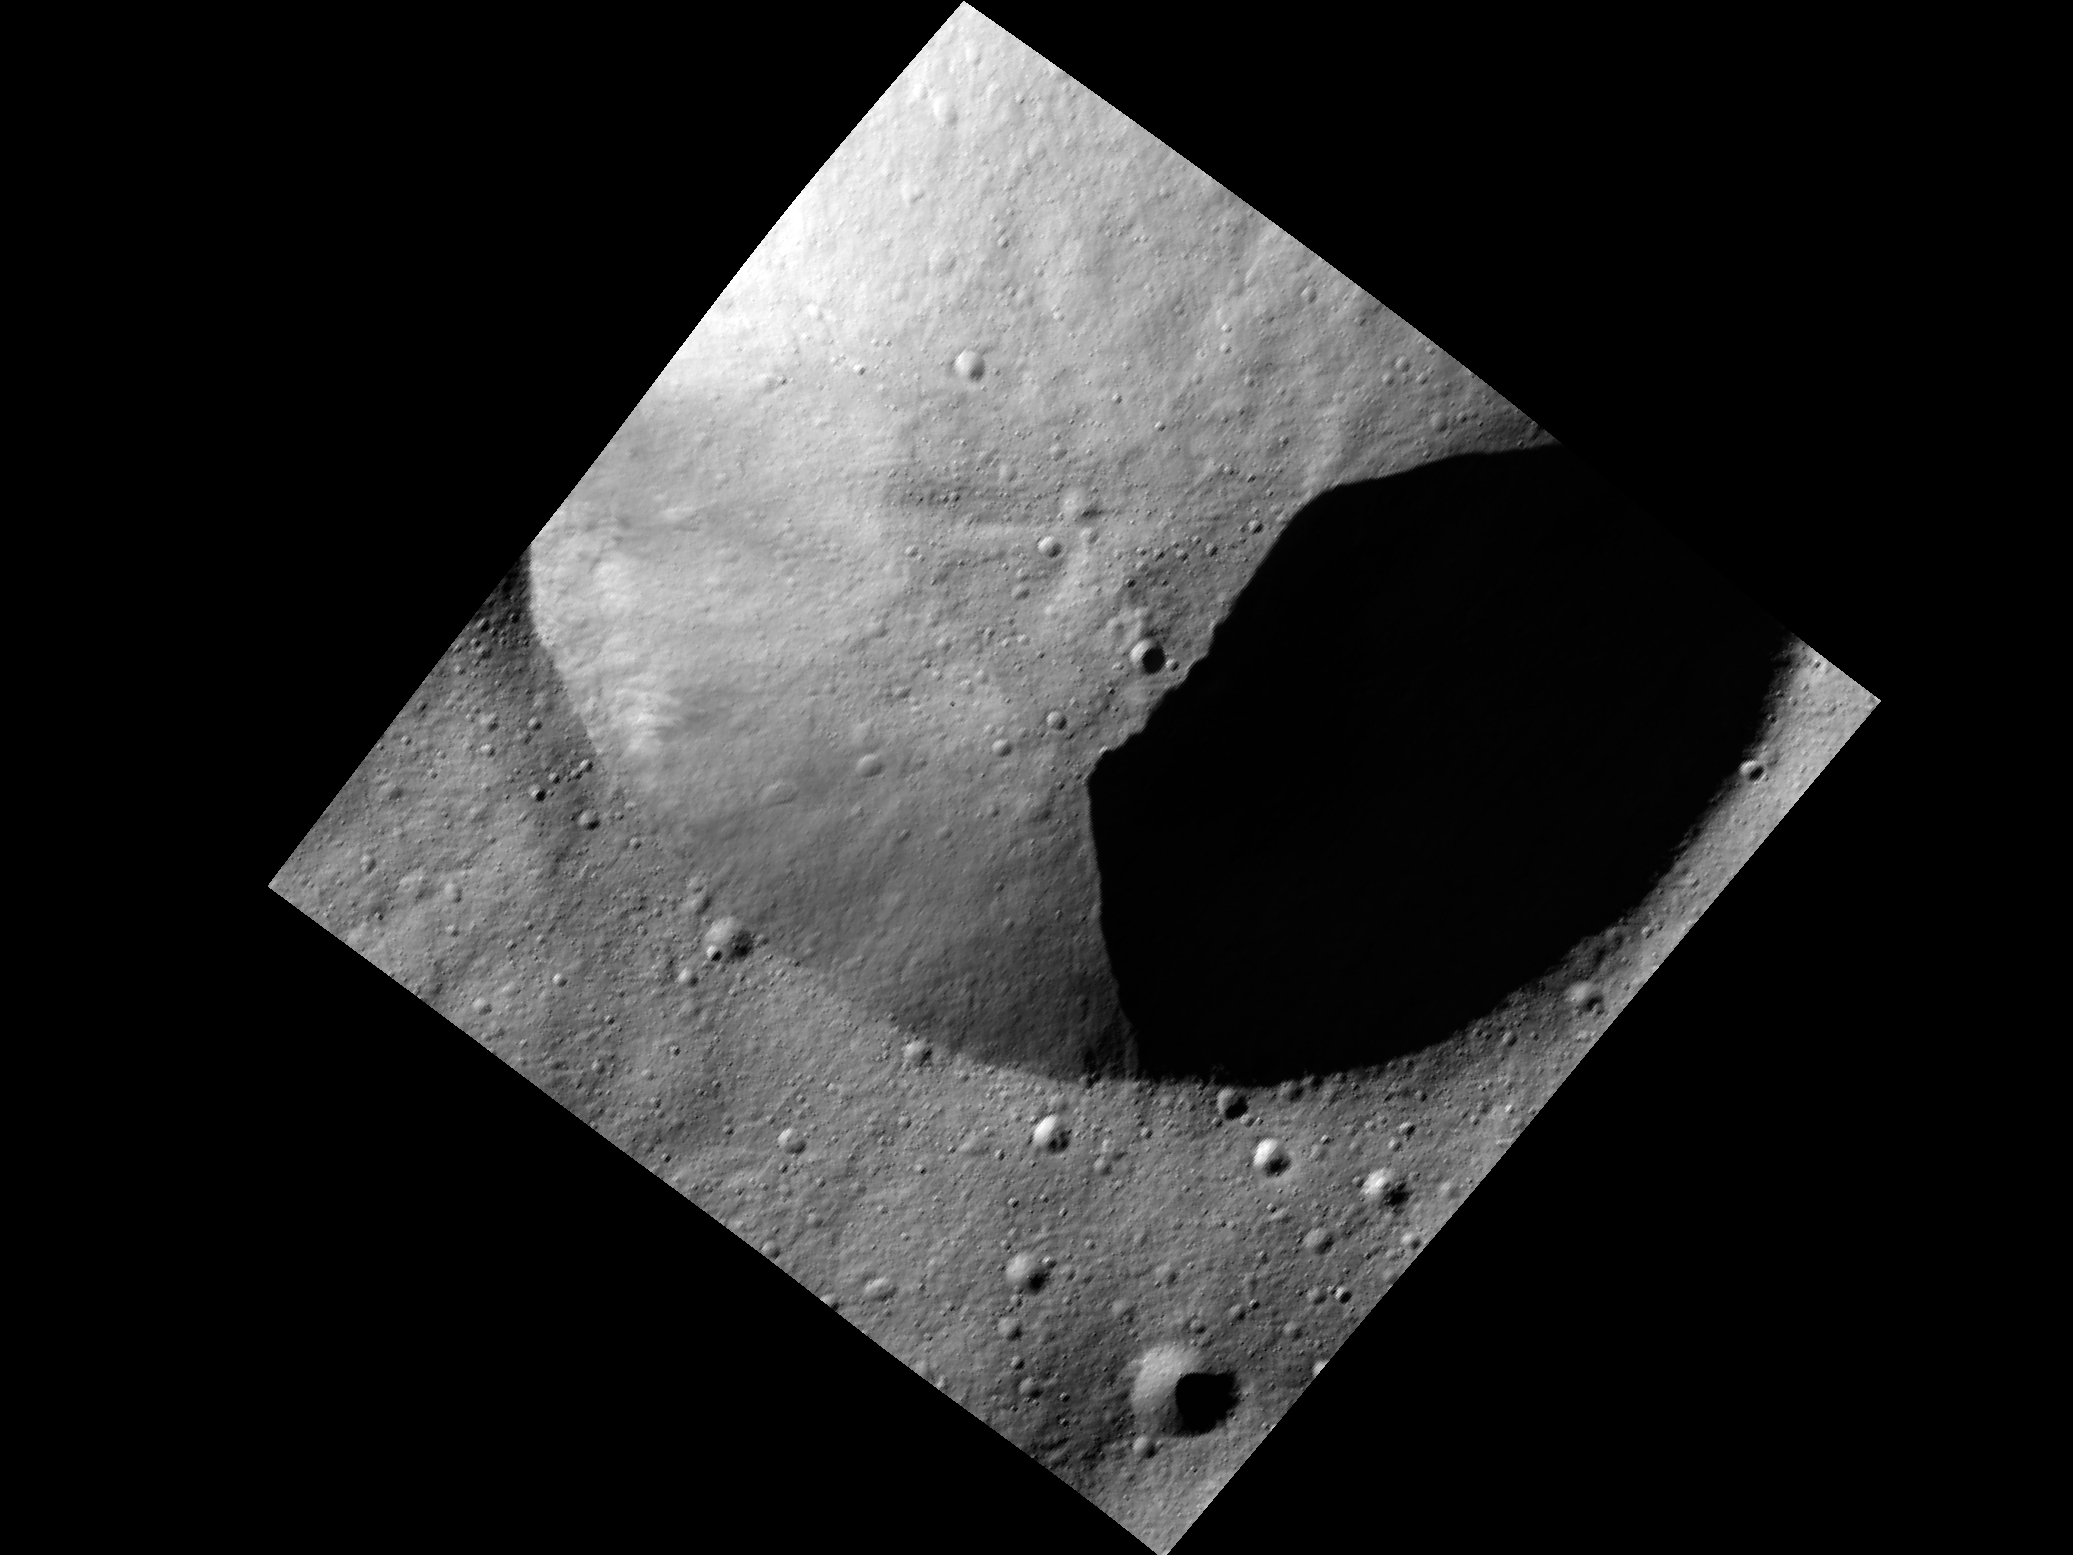 High Resolution Images Of Vesta By DAWN